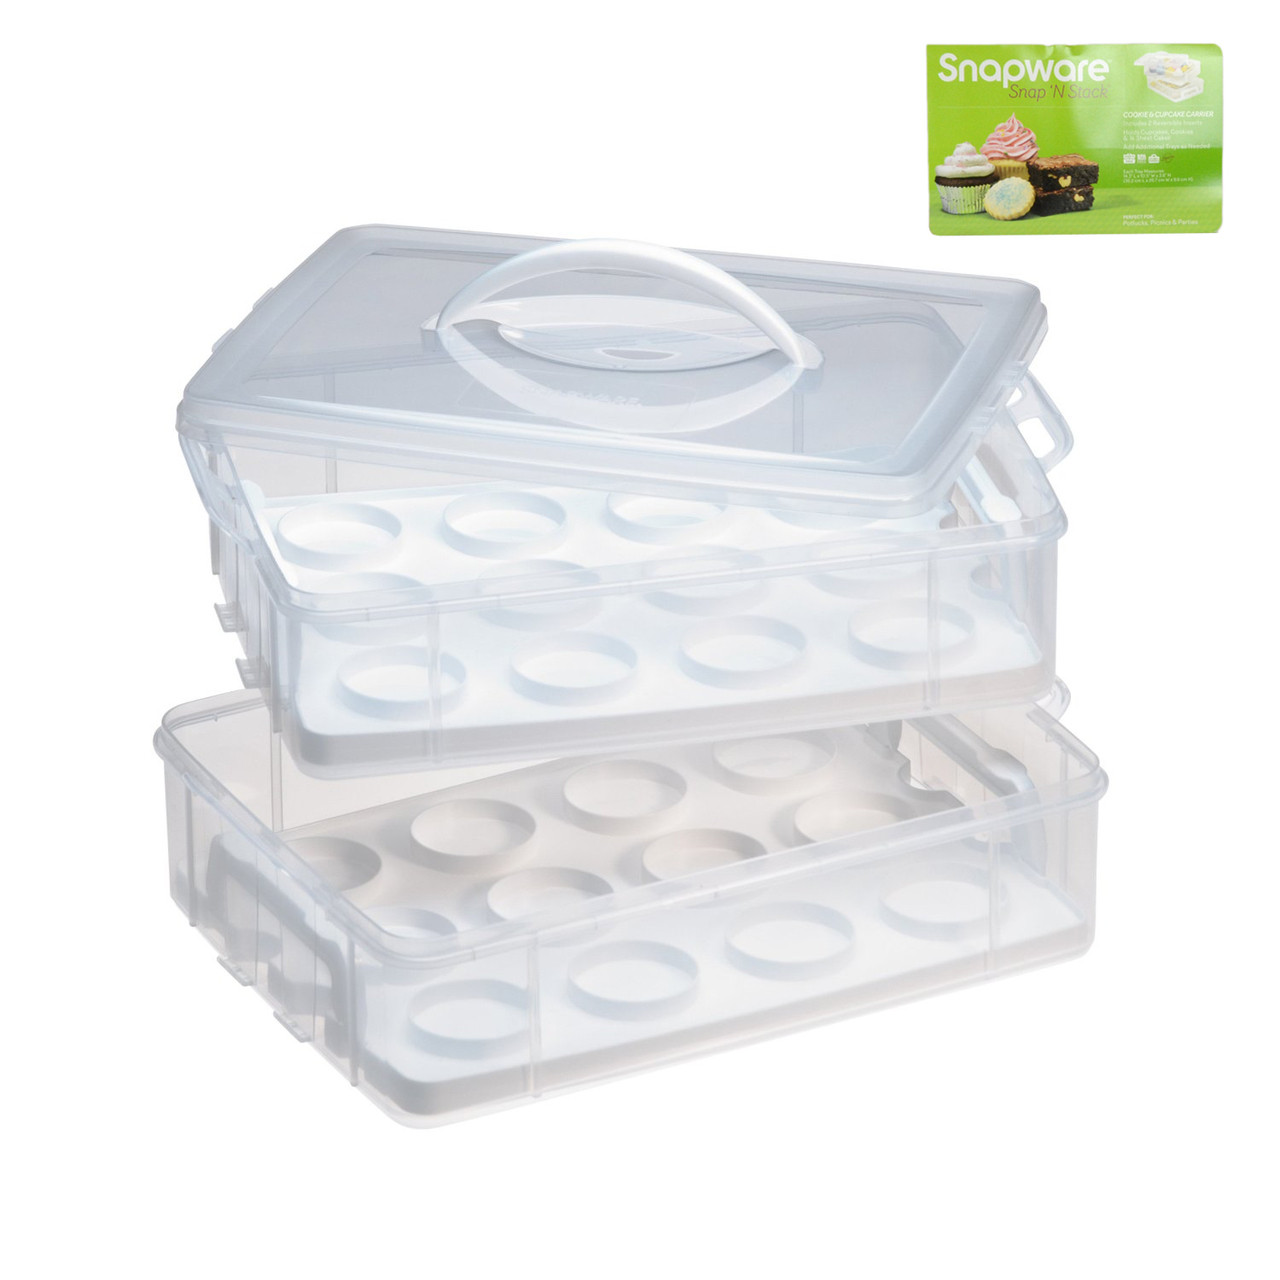 Snapware Plastic 2-Layer Snap 'n Stack Food Storage with Egg Holder Trays (2-Pack)